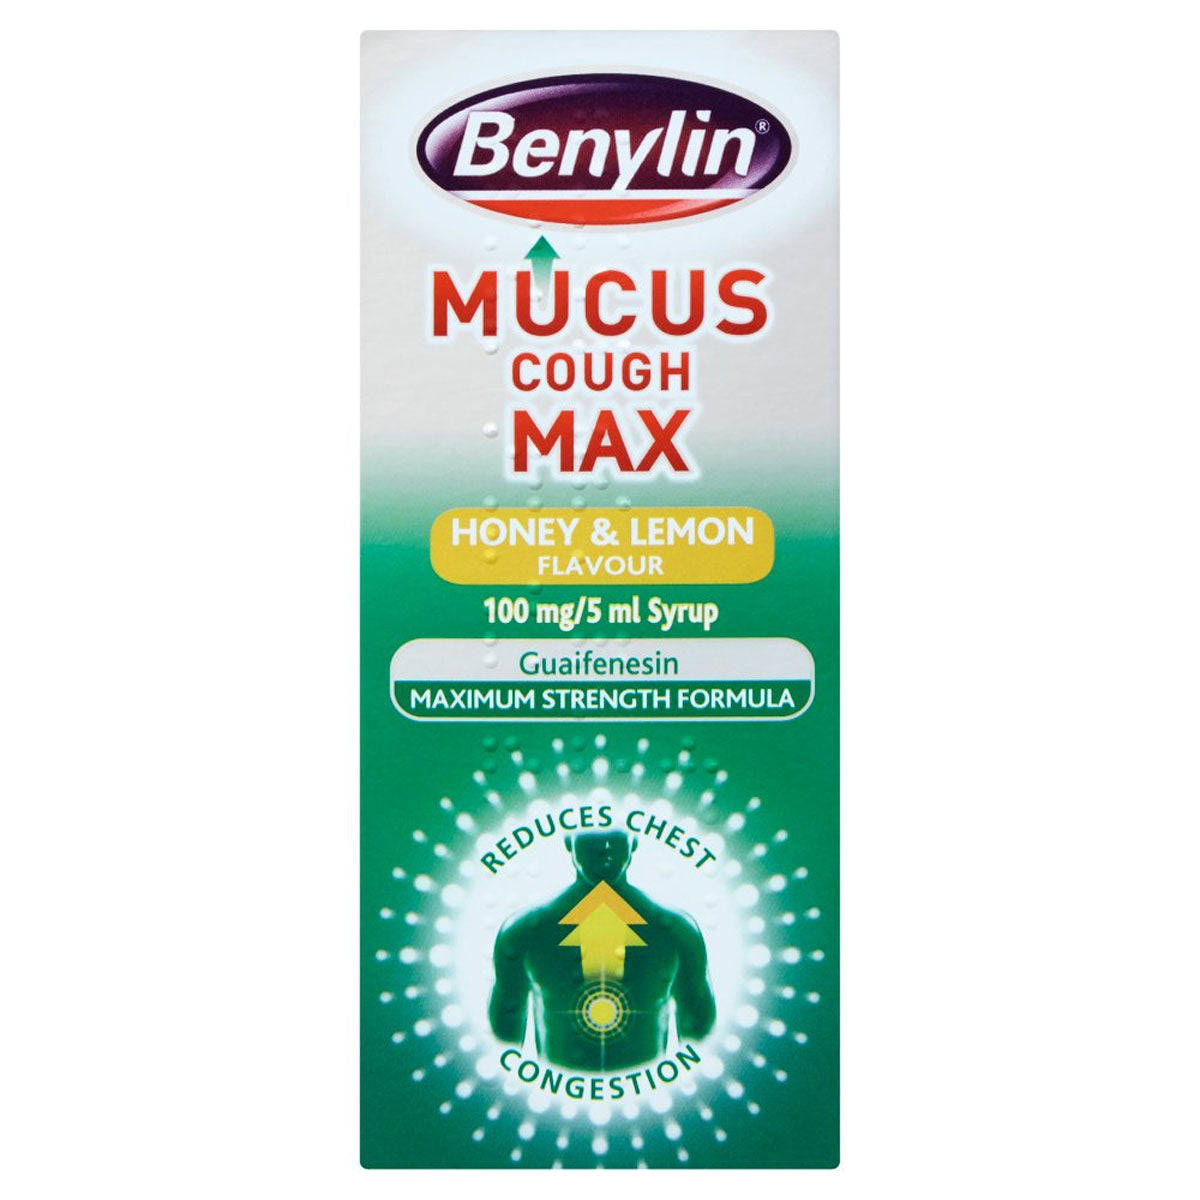 Benylin - Mucus Cough Max Honey & Lemon Flavour 100 mg/5 ml Syrup - 150ml - Continental Food Store